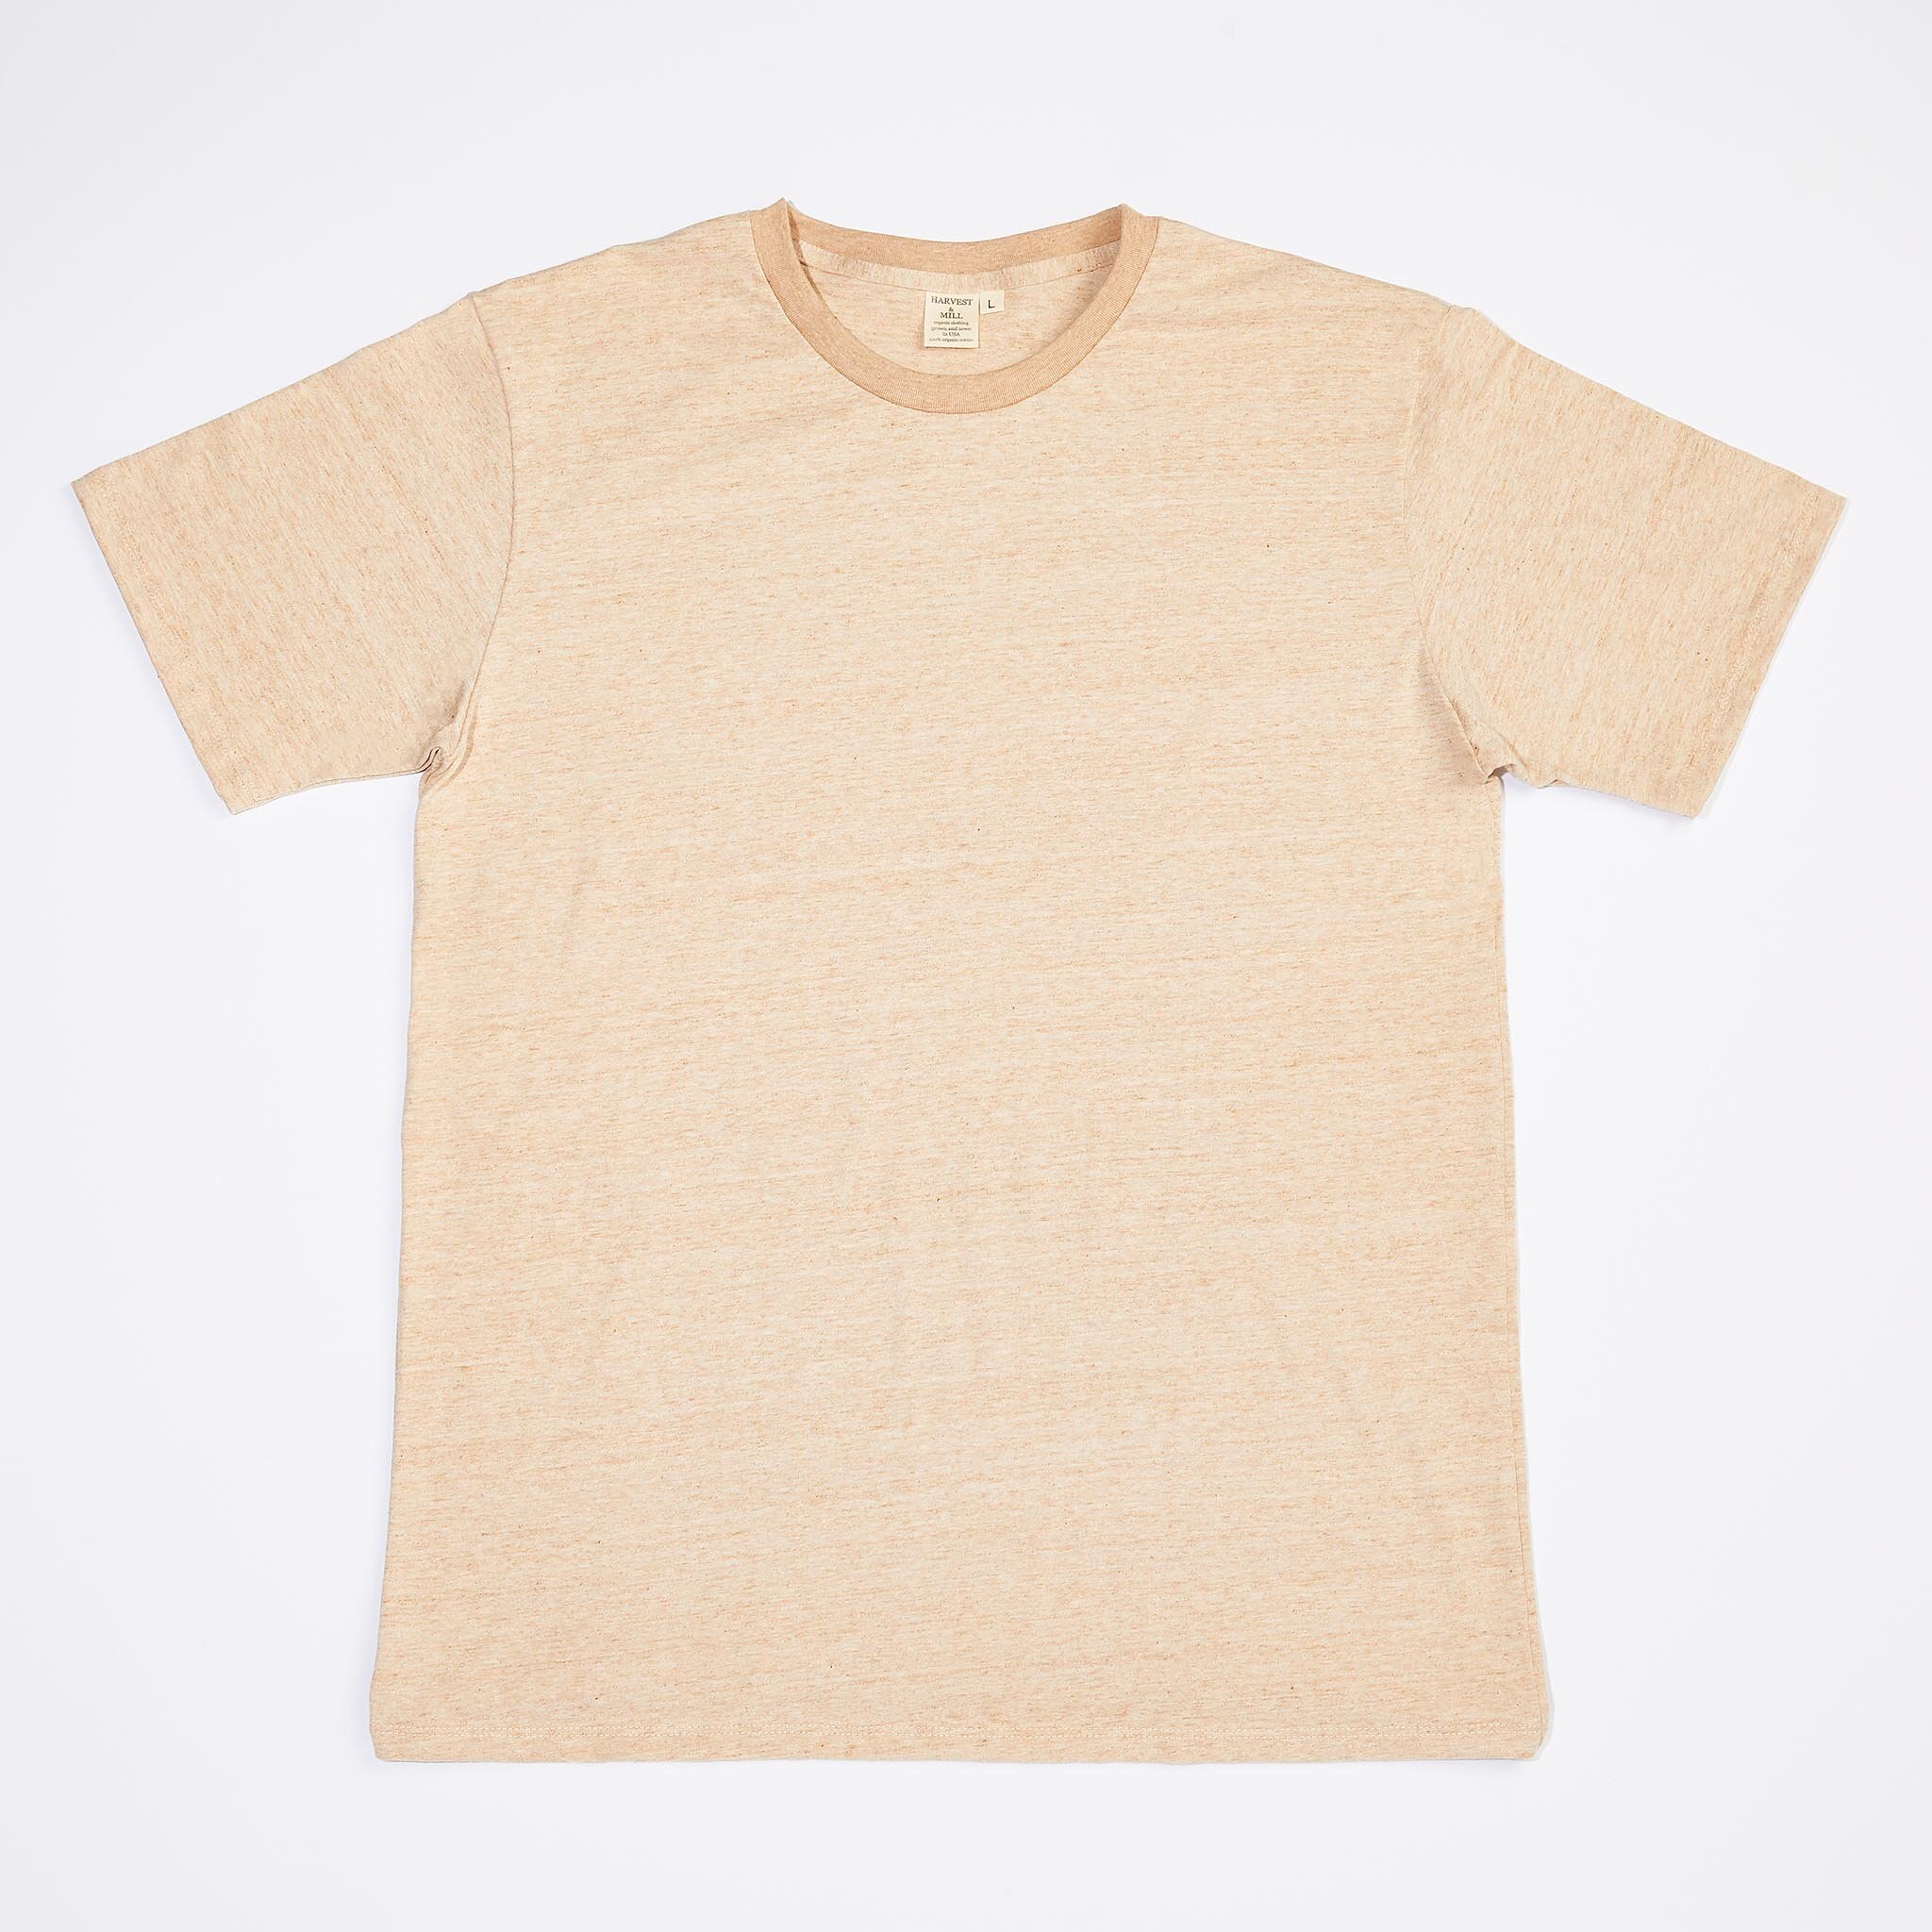 Organic heirloom cotton for a more sustainable future. Detox your ...